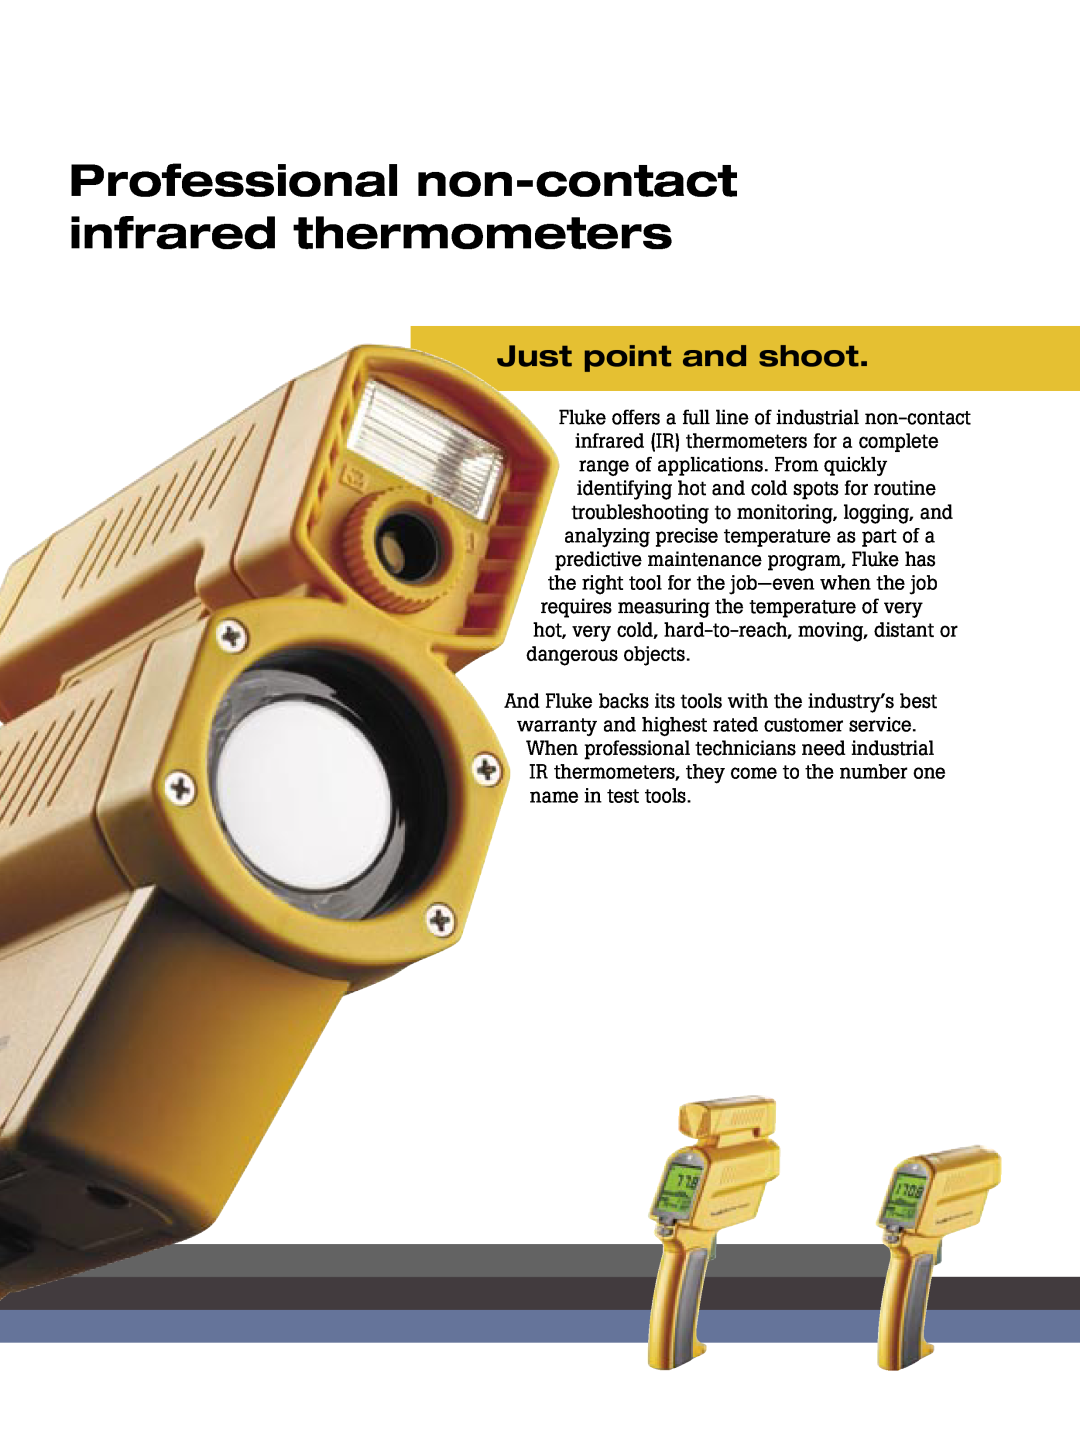 Fluke 574, 572, 68, 576, 62, 66, 63 brochure Just point and shoot, Professional non-contact infrared thermometers 